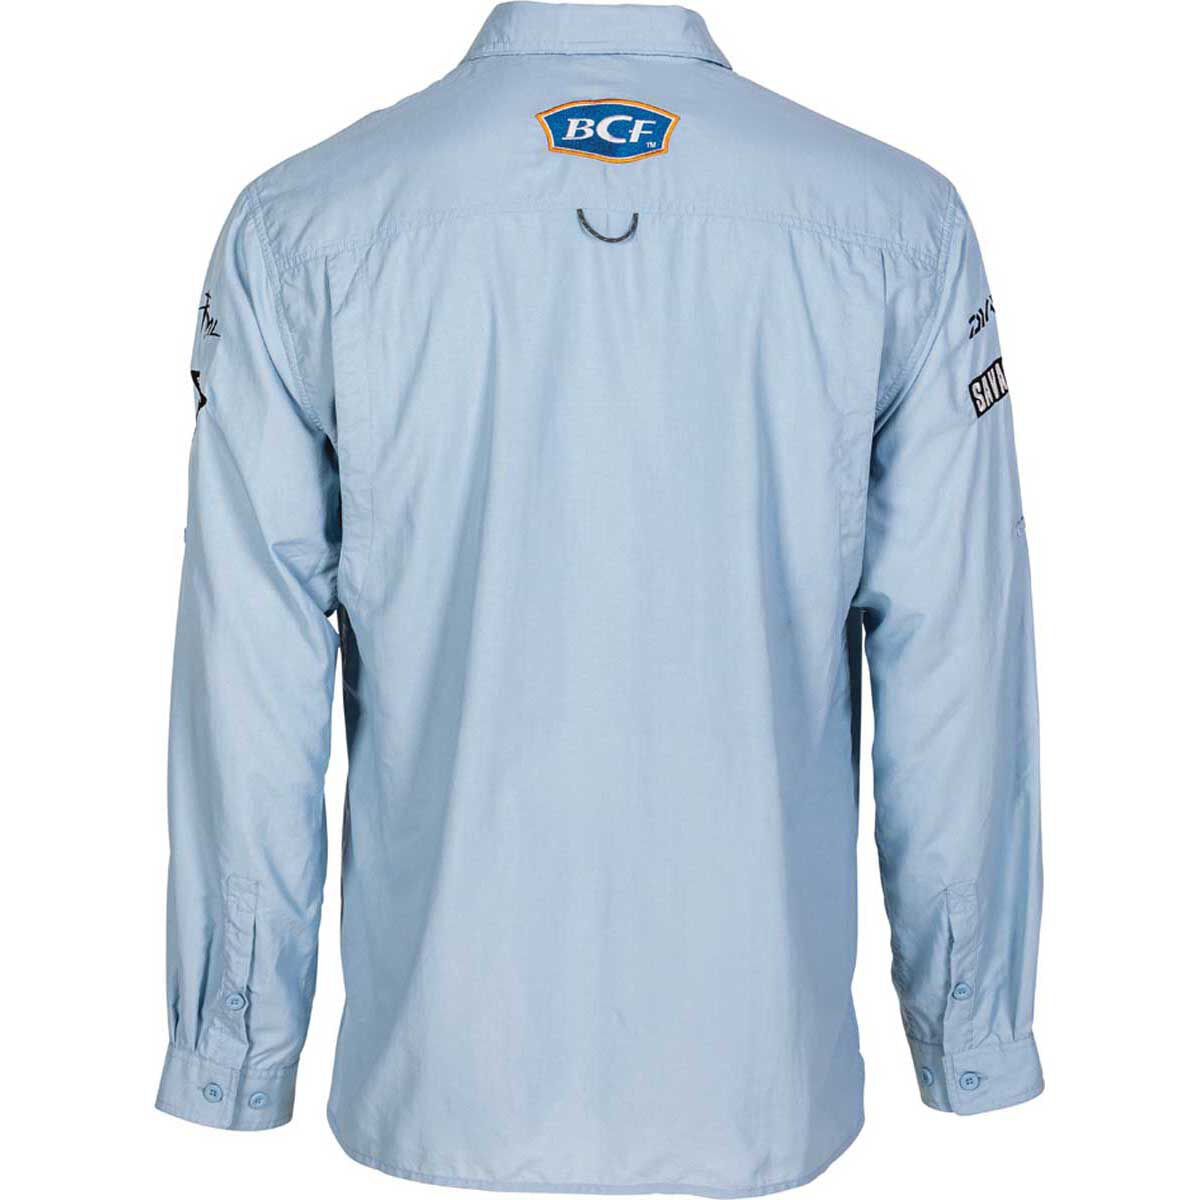 Buy Fishing Shirts Bcf Online In India -  India